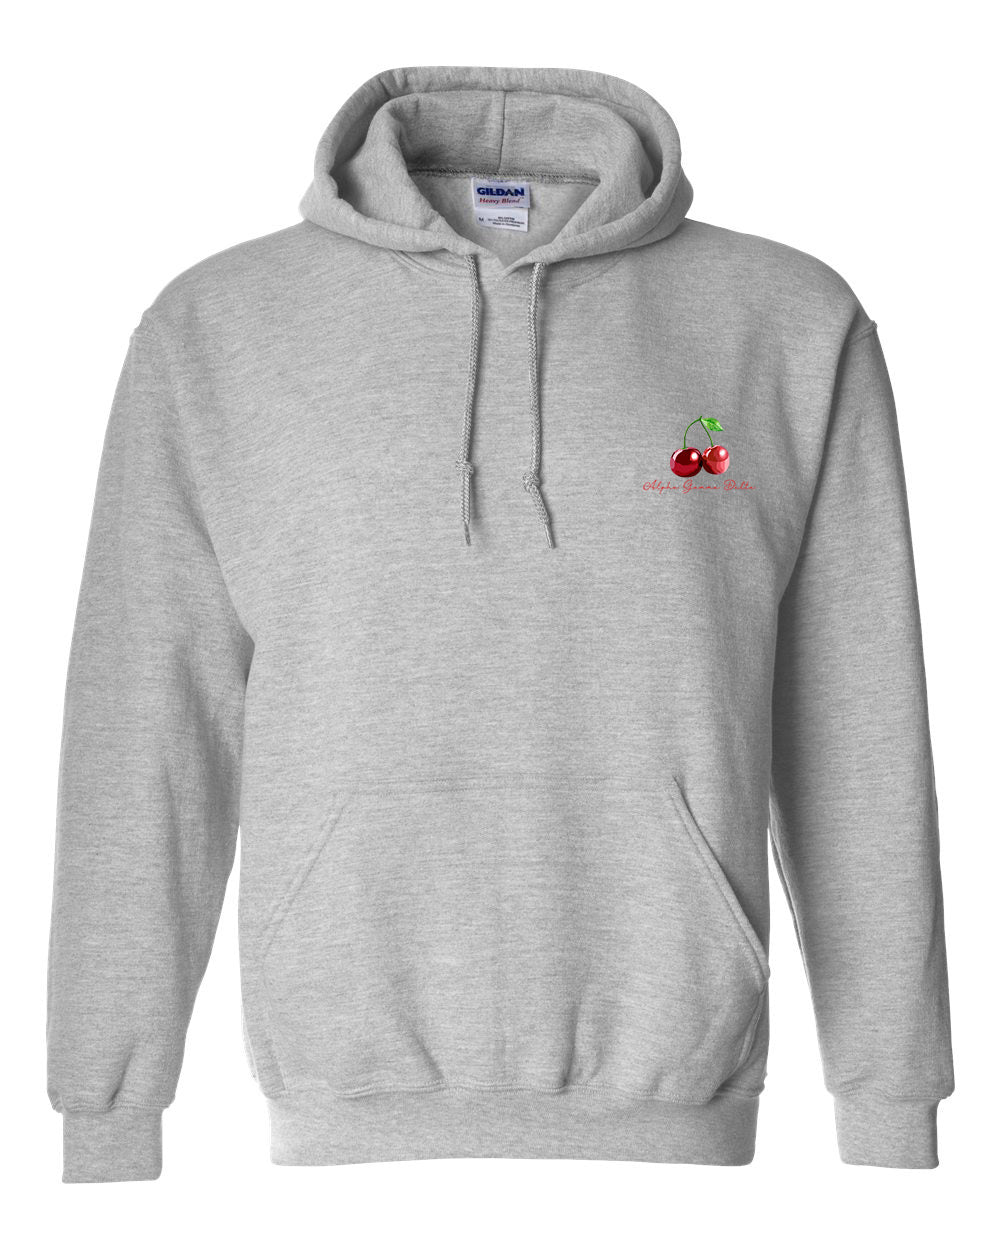 a grey hooded sweatshirt with a red apple embroidered on the chest